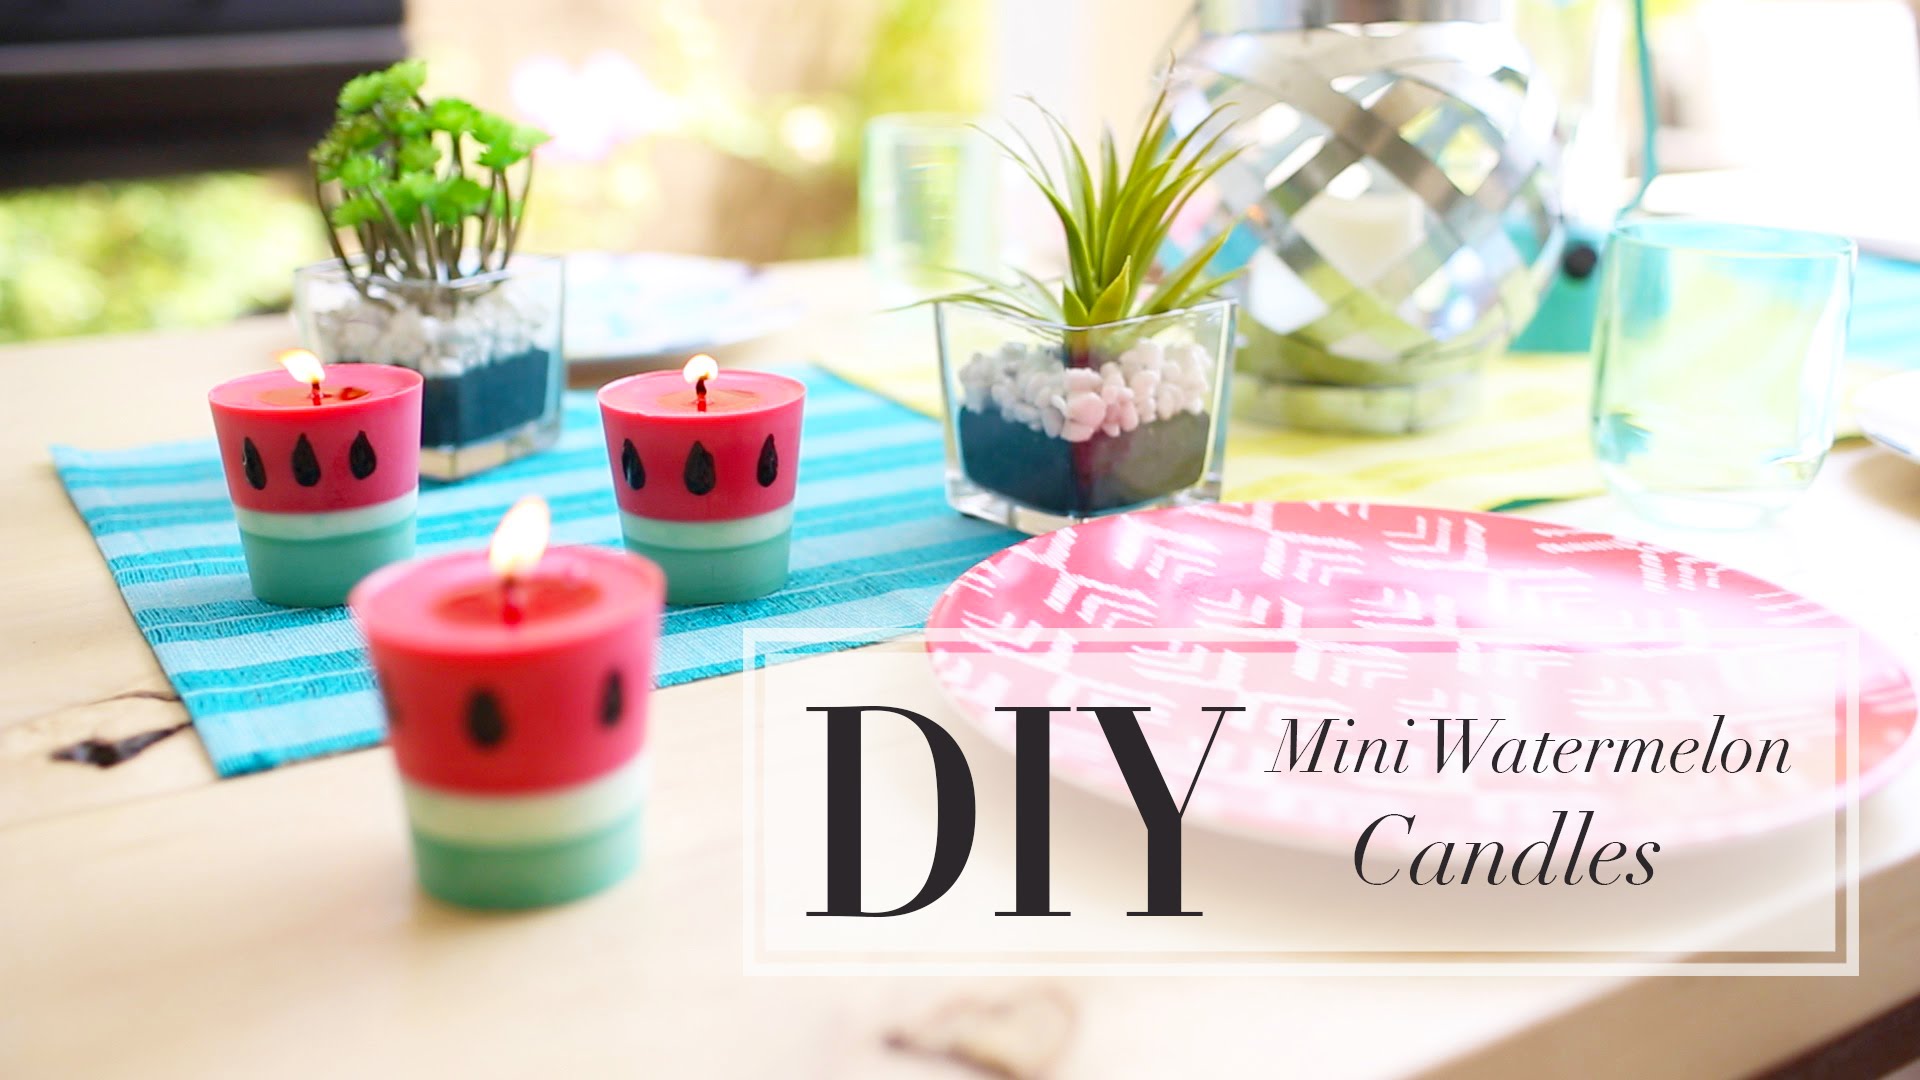 DIY how to Make a Watermelon Candle step by step